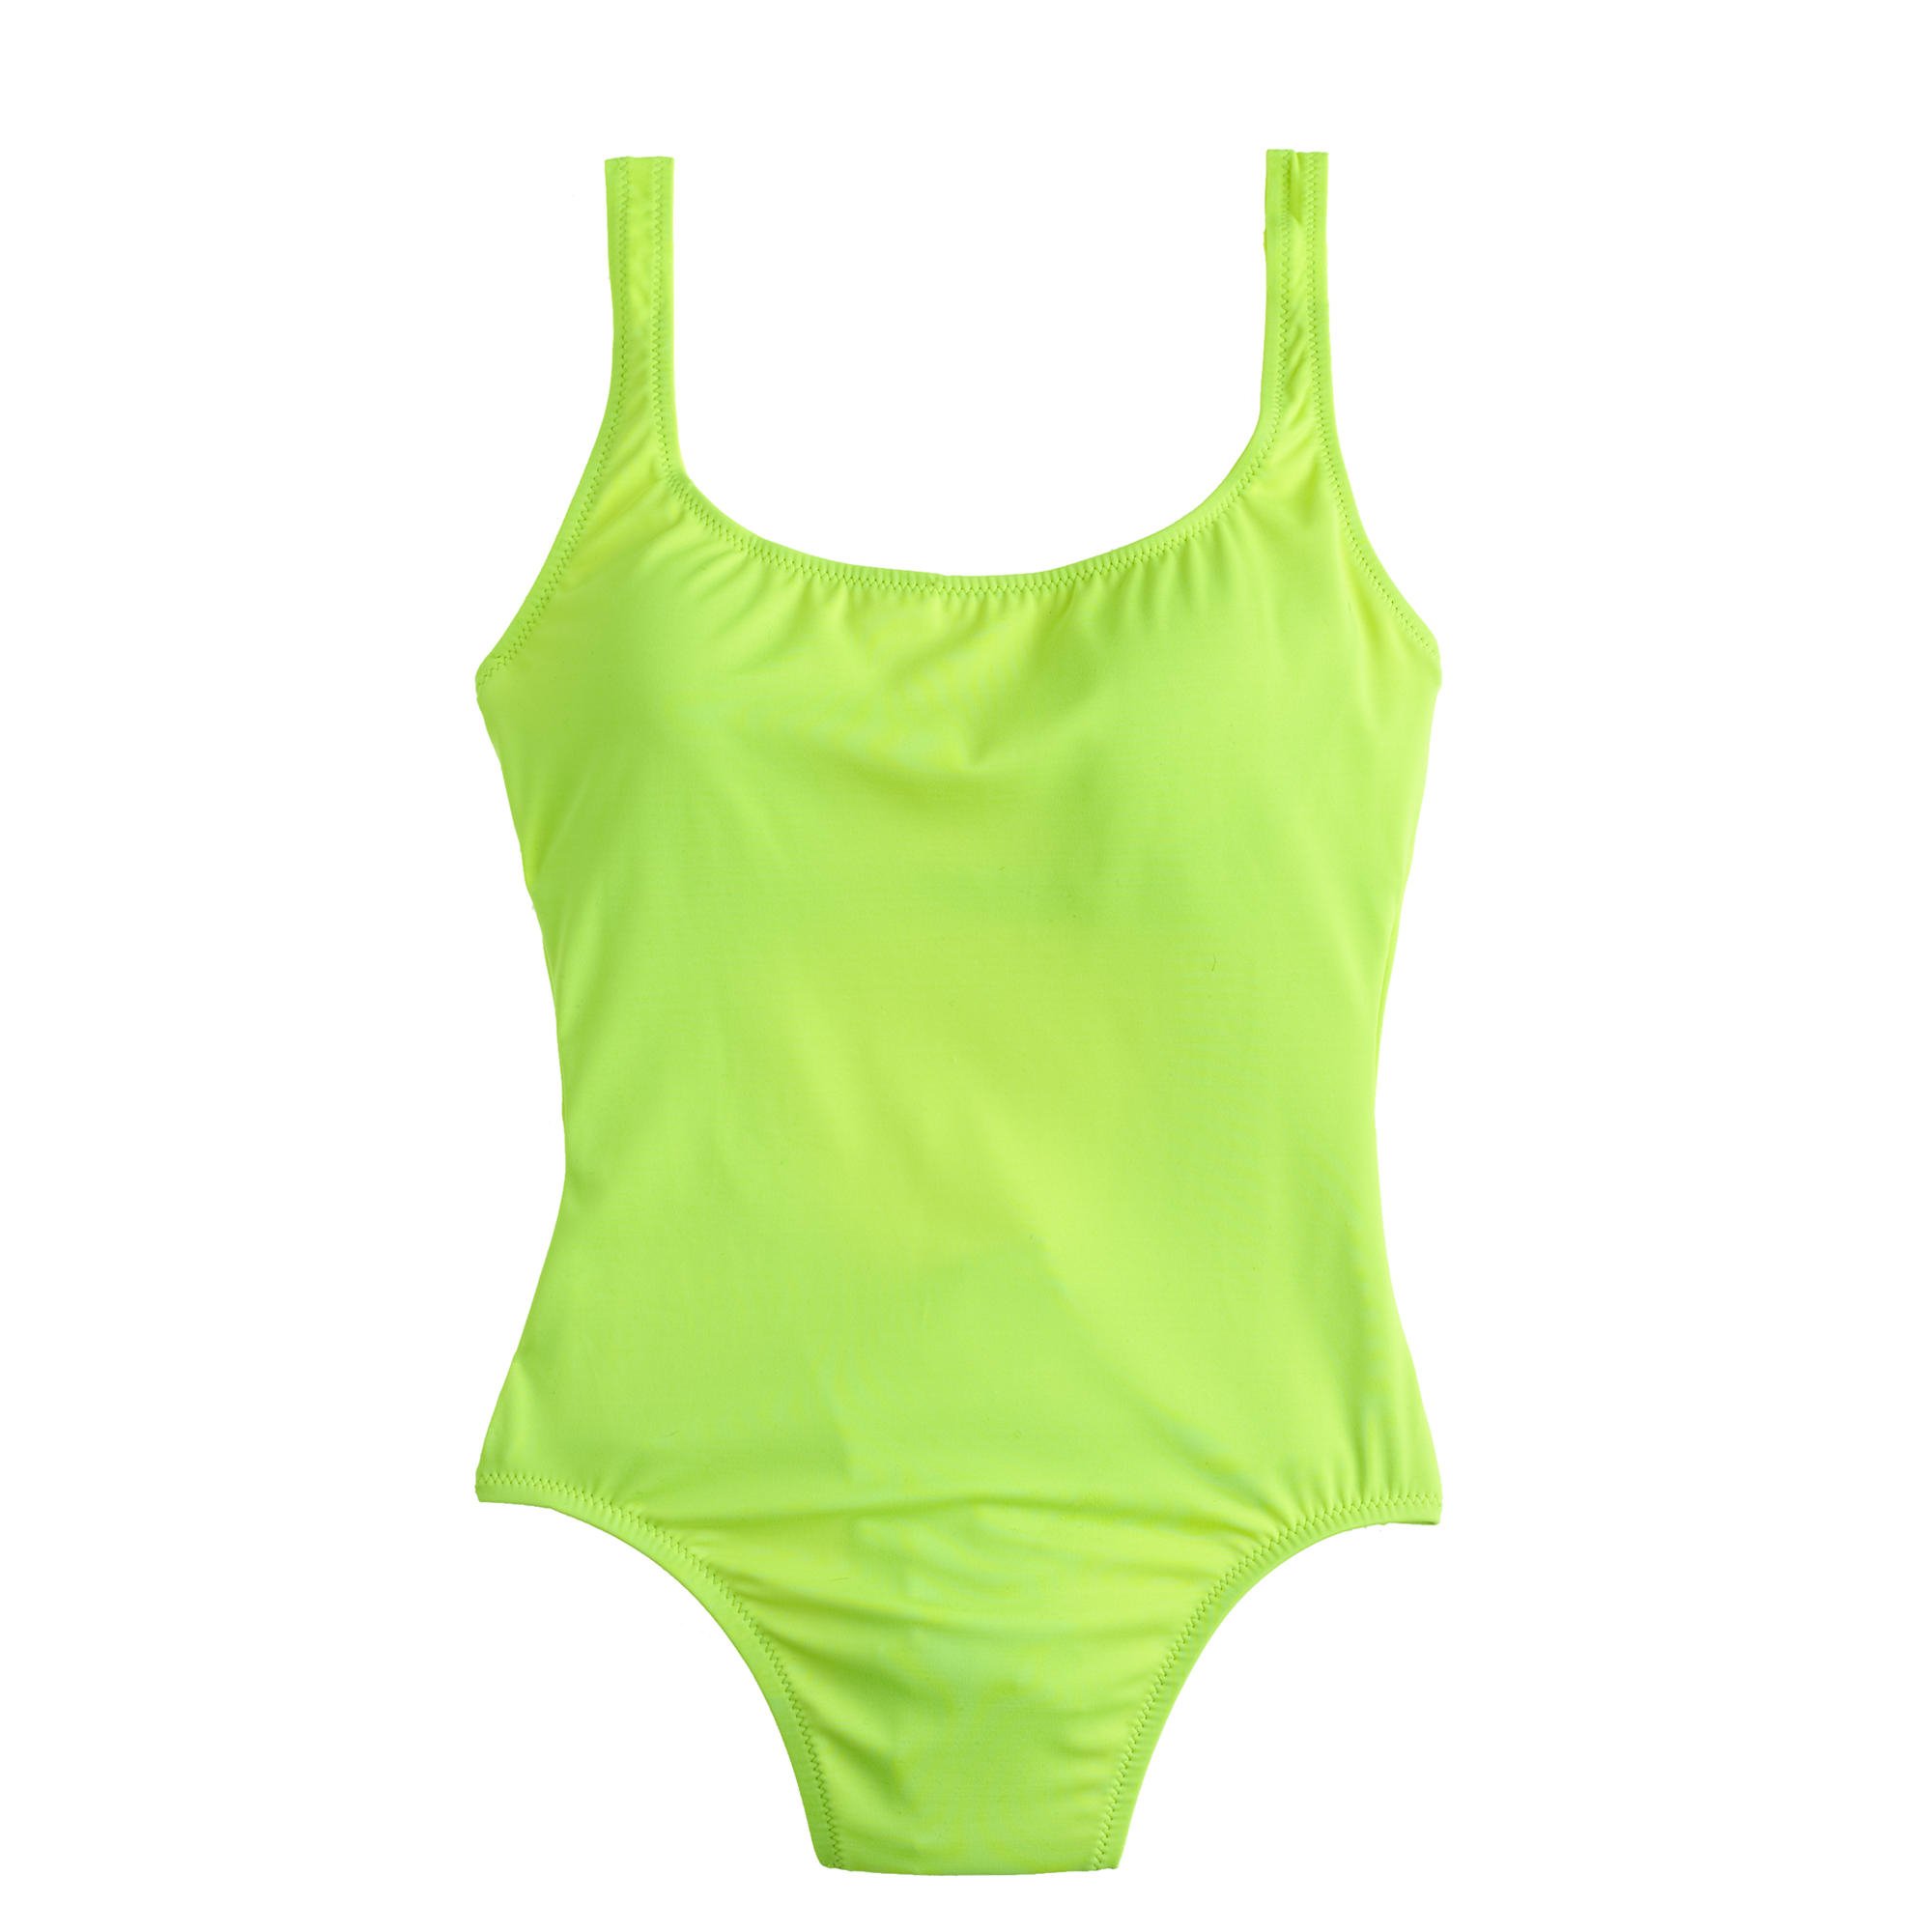 Cutout one-piece full-coverage swimsuit with buttons